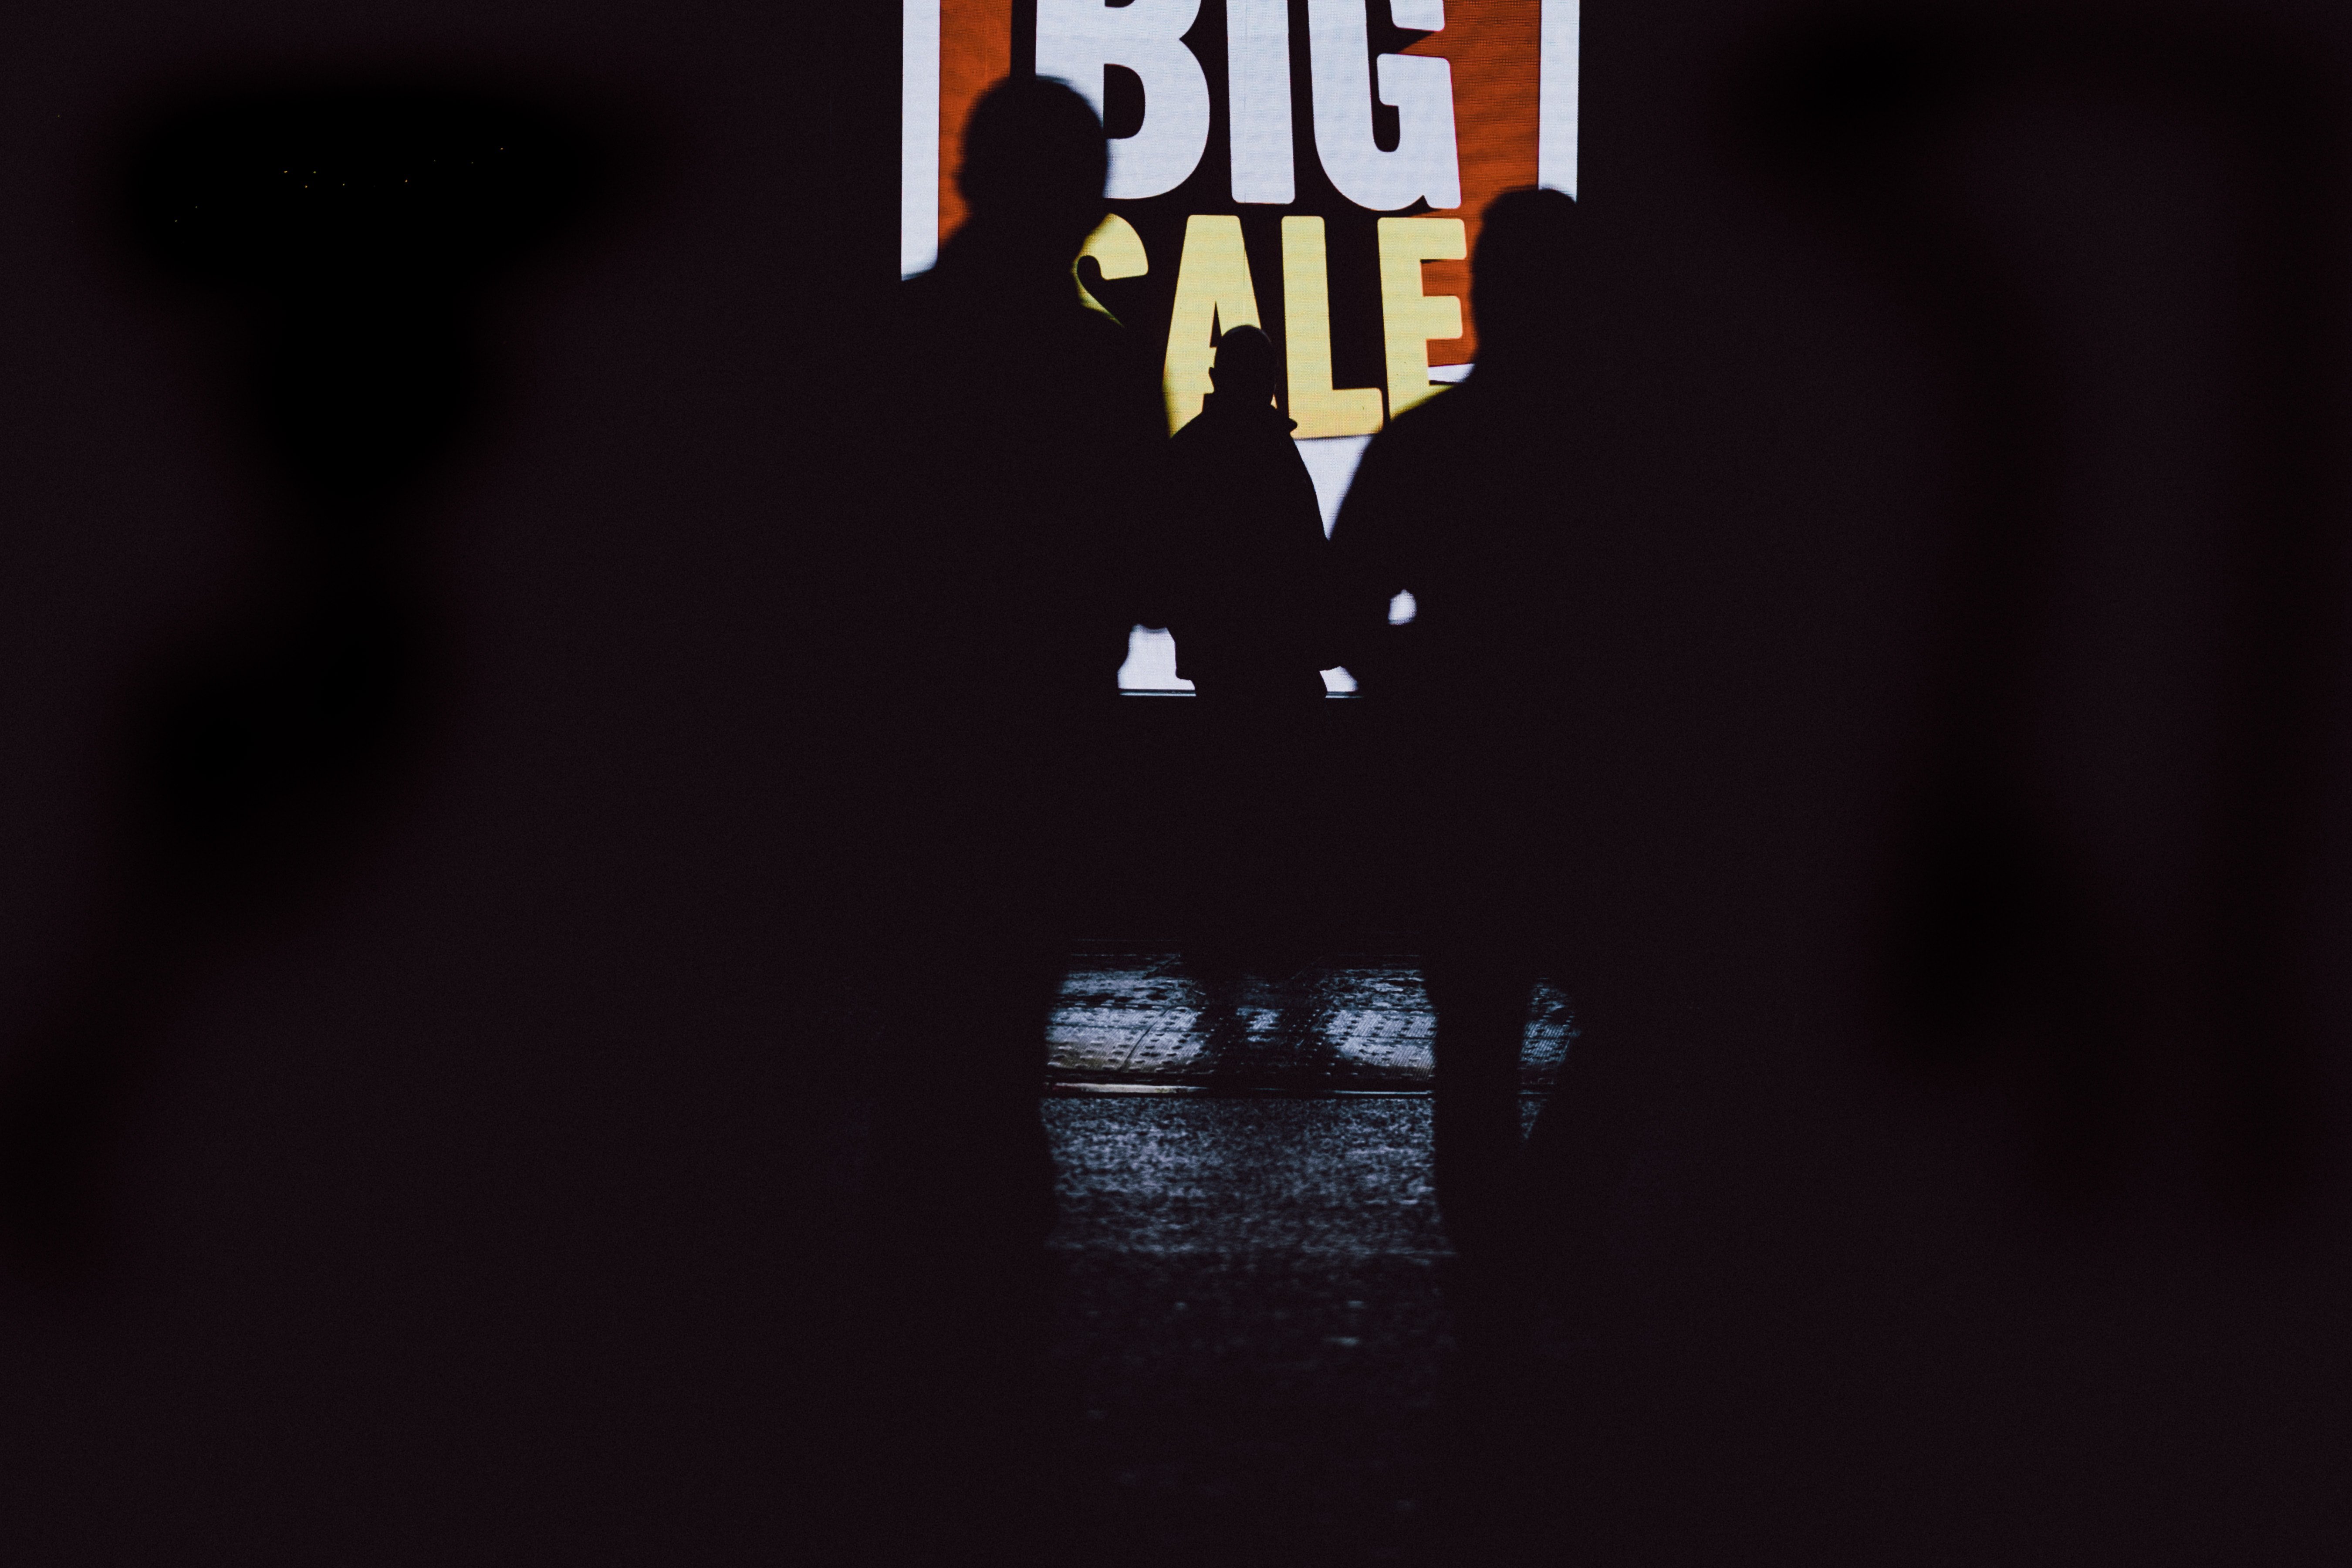 Silhouettes of people in front of a sale sign. | Source: Unsplash